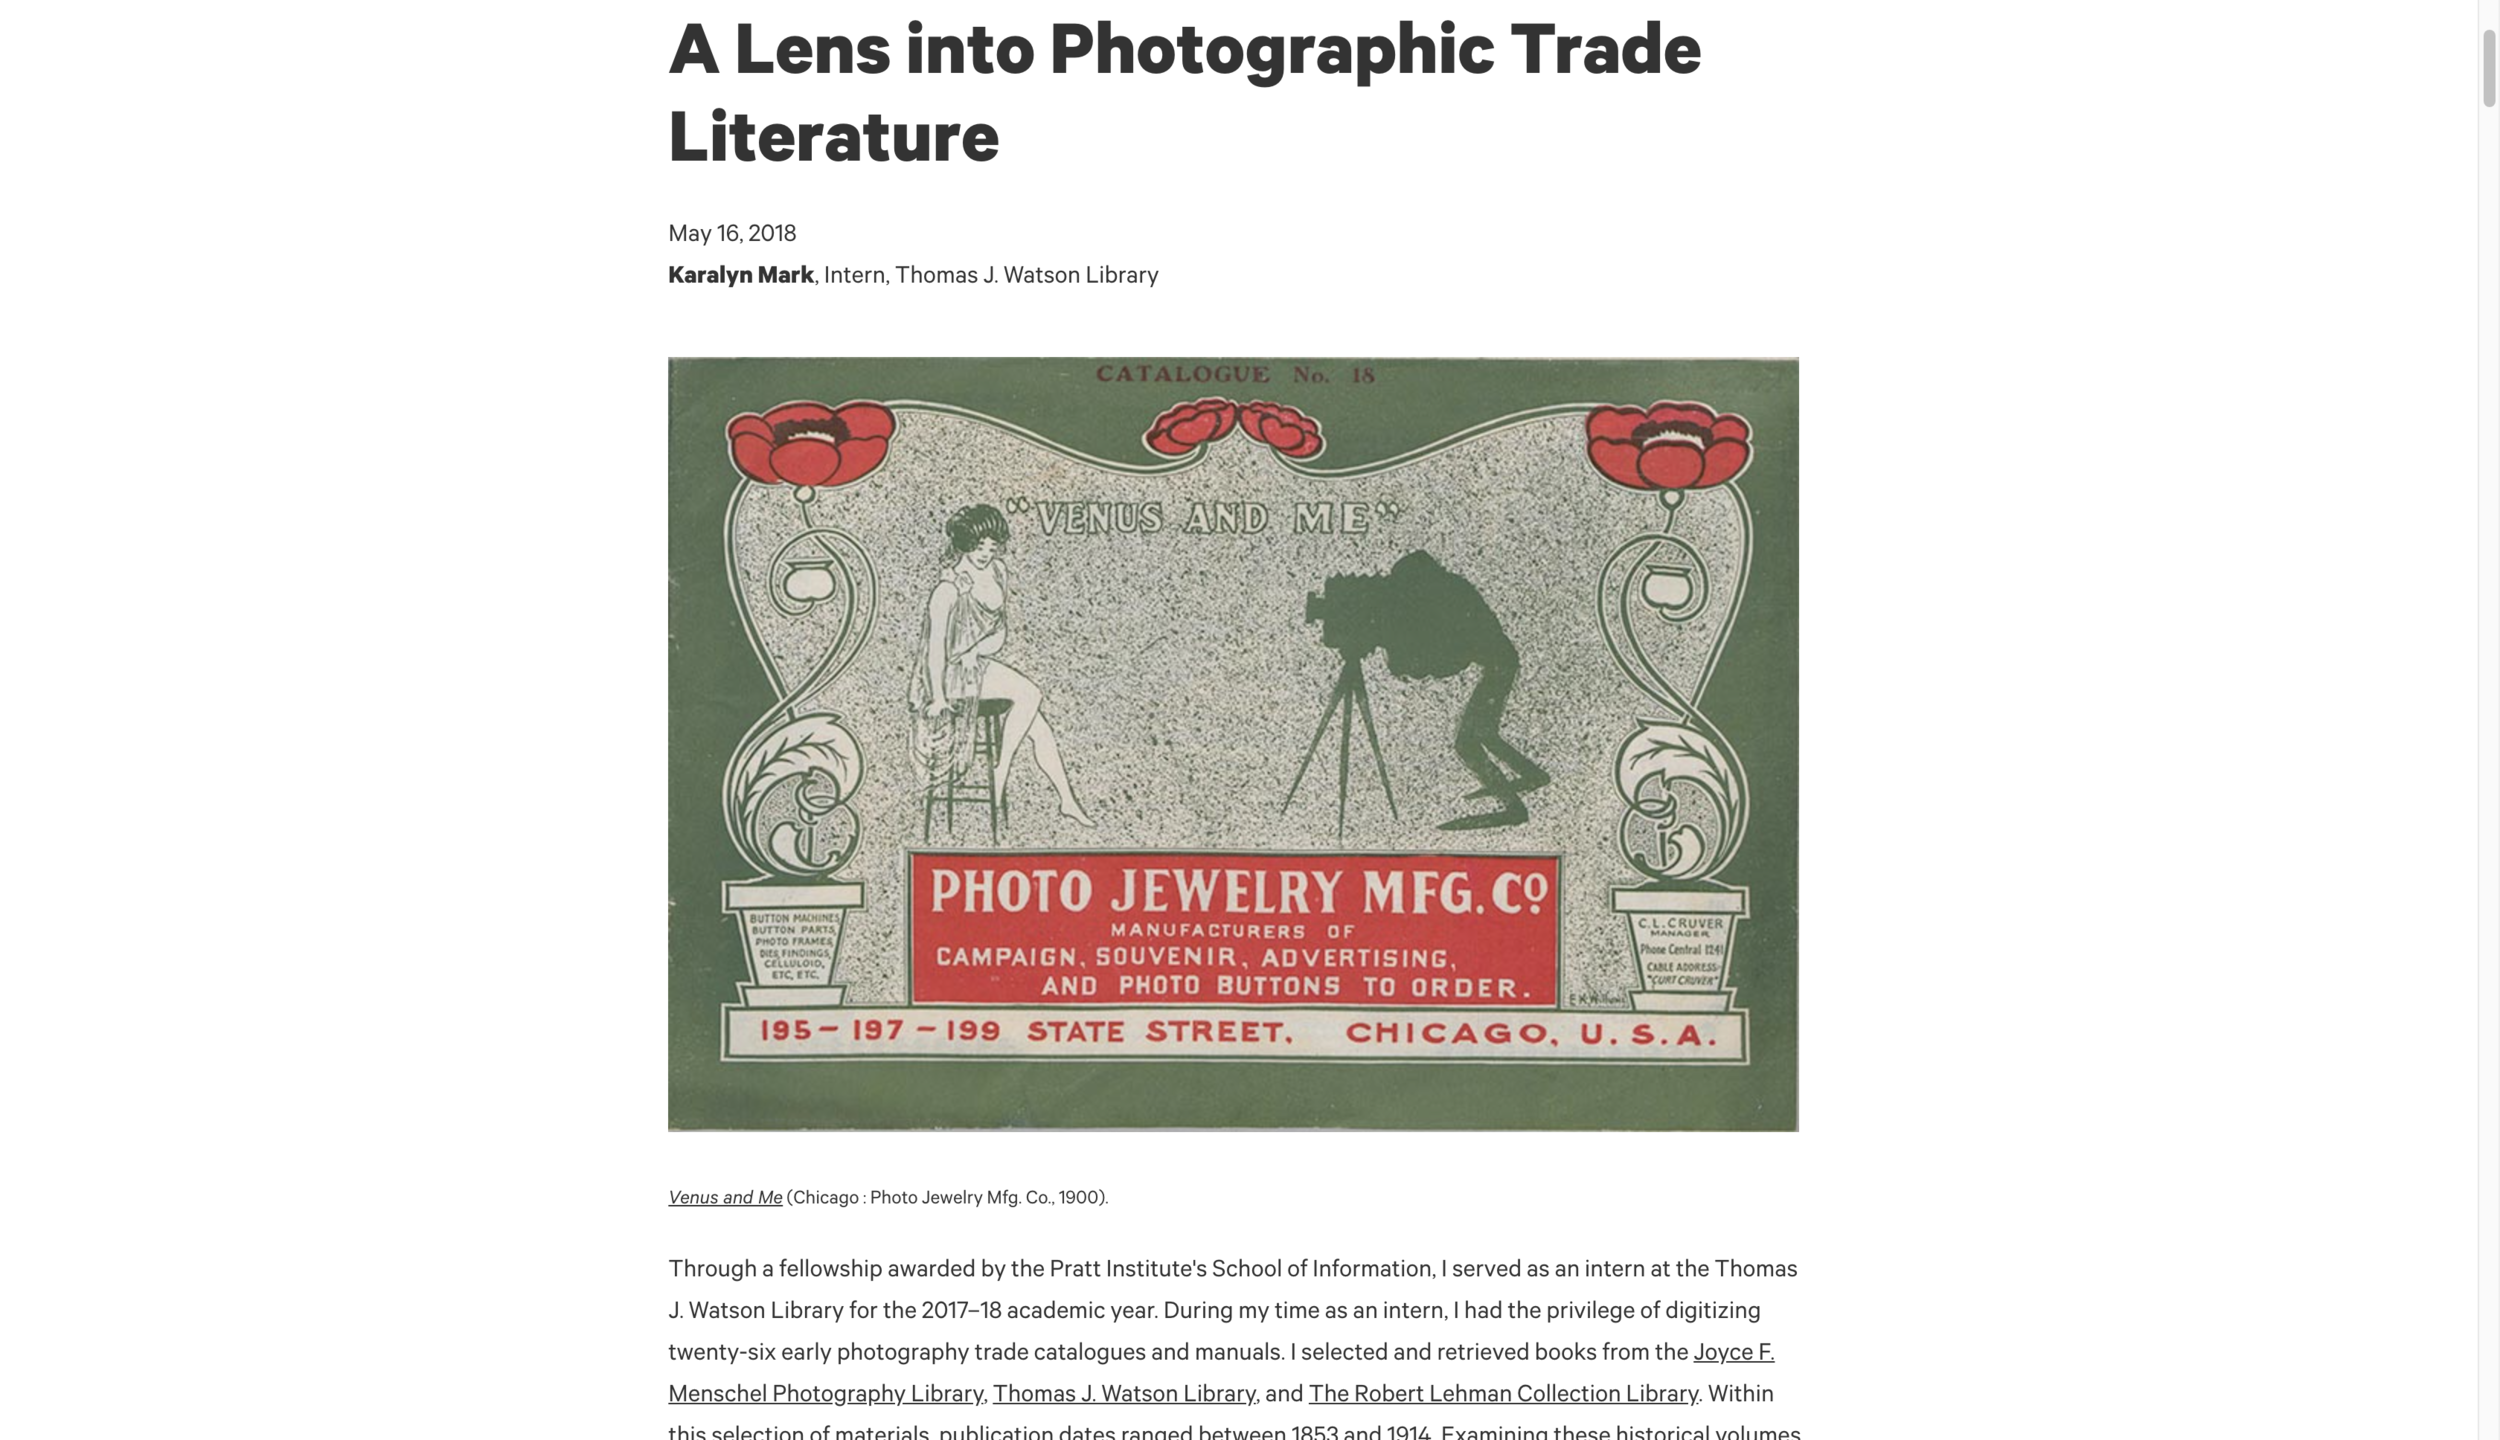   My blog post written for  In Circulation , “   A Lens into Photographic Trade Literature   ,” in which I highlight some of the materials digitized and discuss my Fellowship experience.  